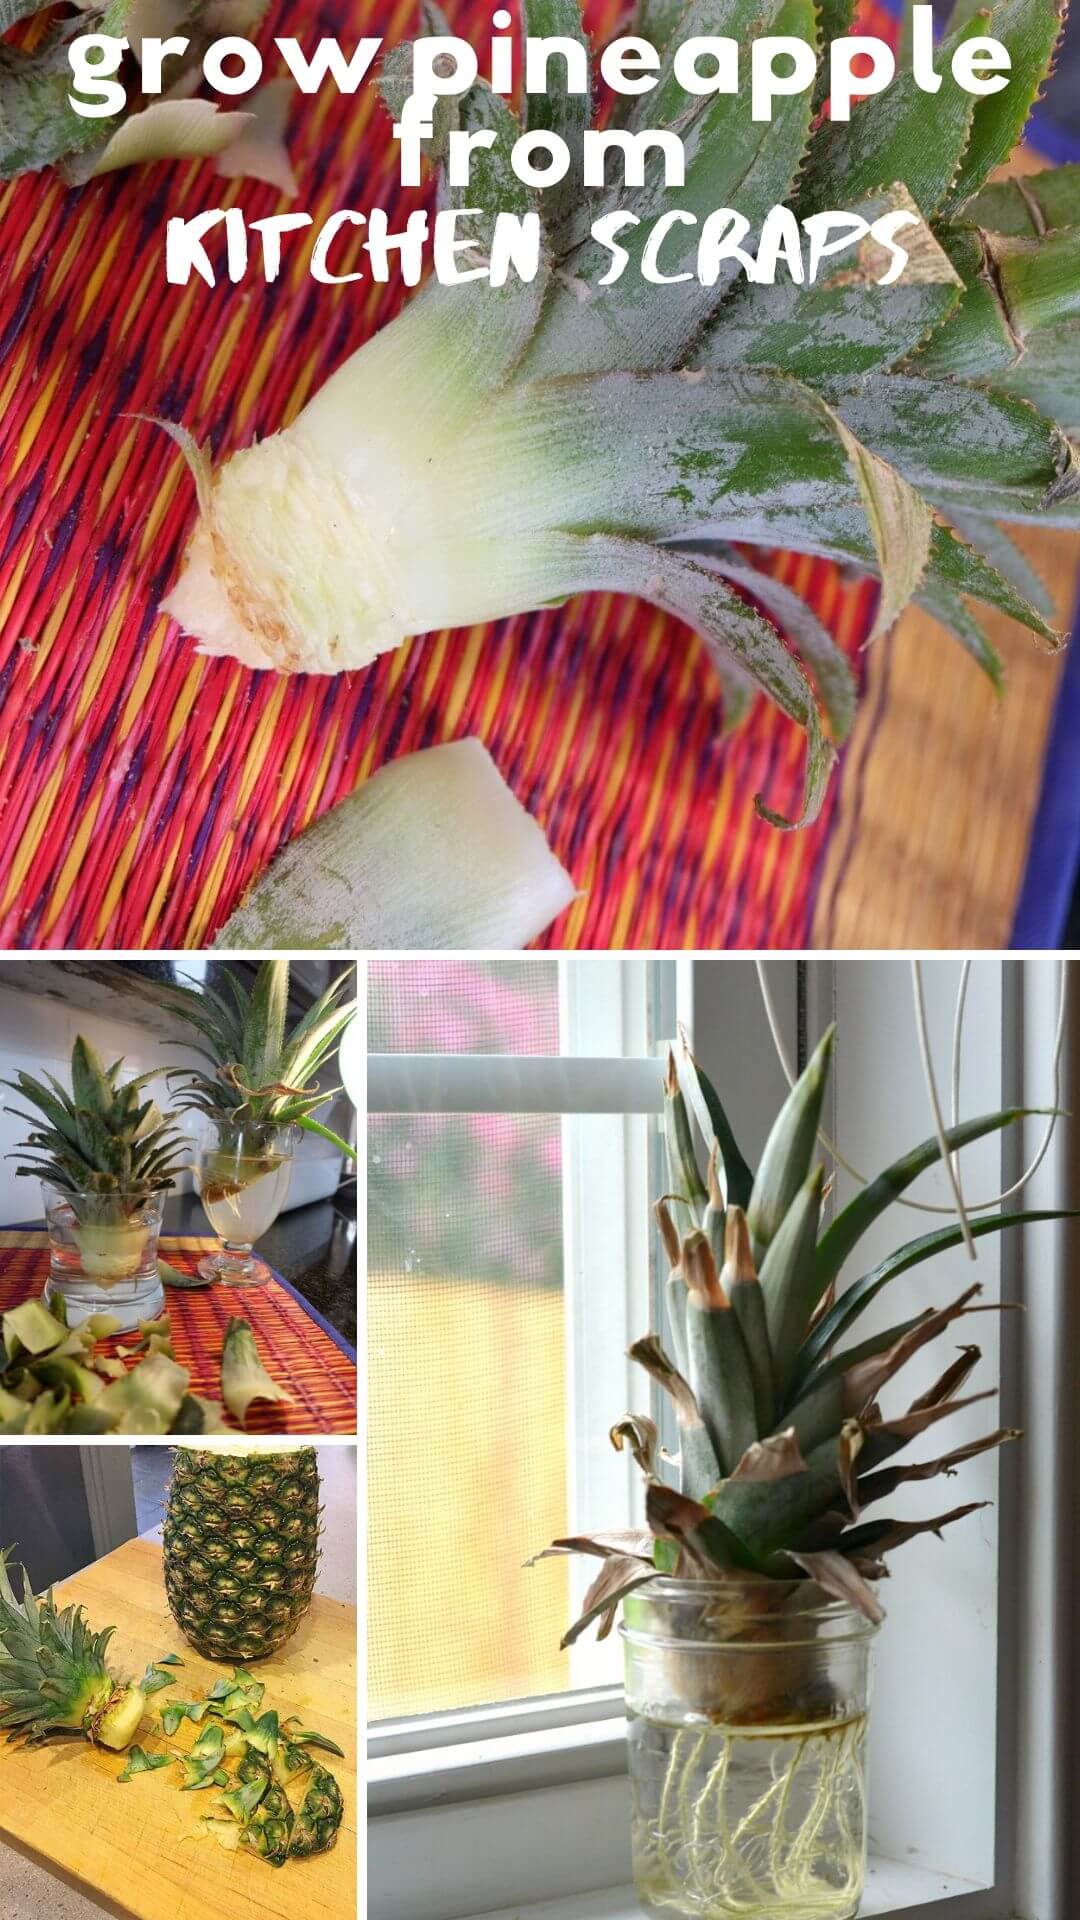 How to grow pineapple from kitchen scraps